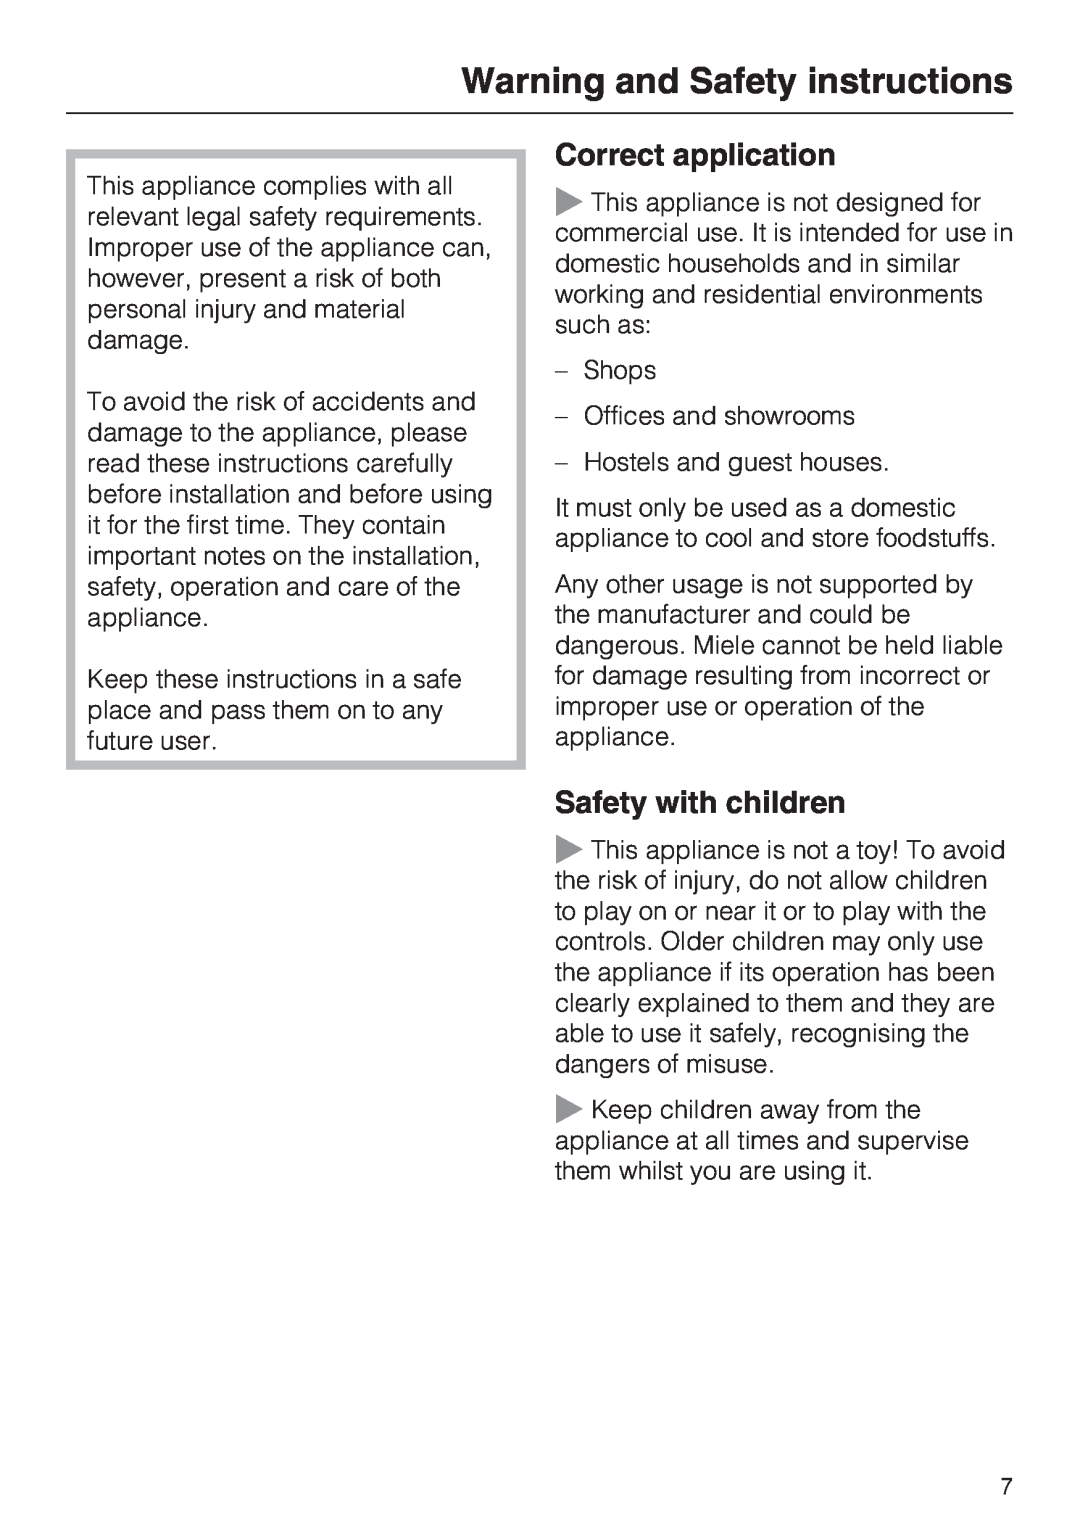 Miele K9552, K9752 installation instructions Warning and Safety instructions, Correct application, Safety with children 